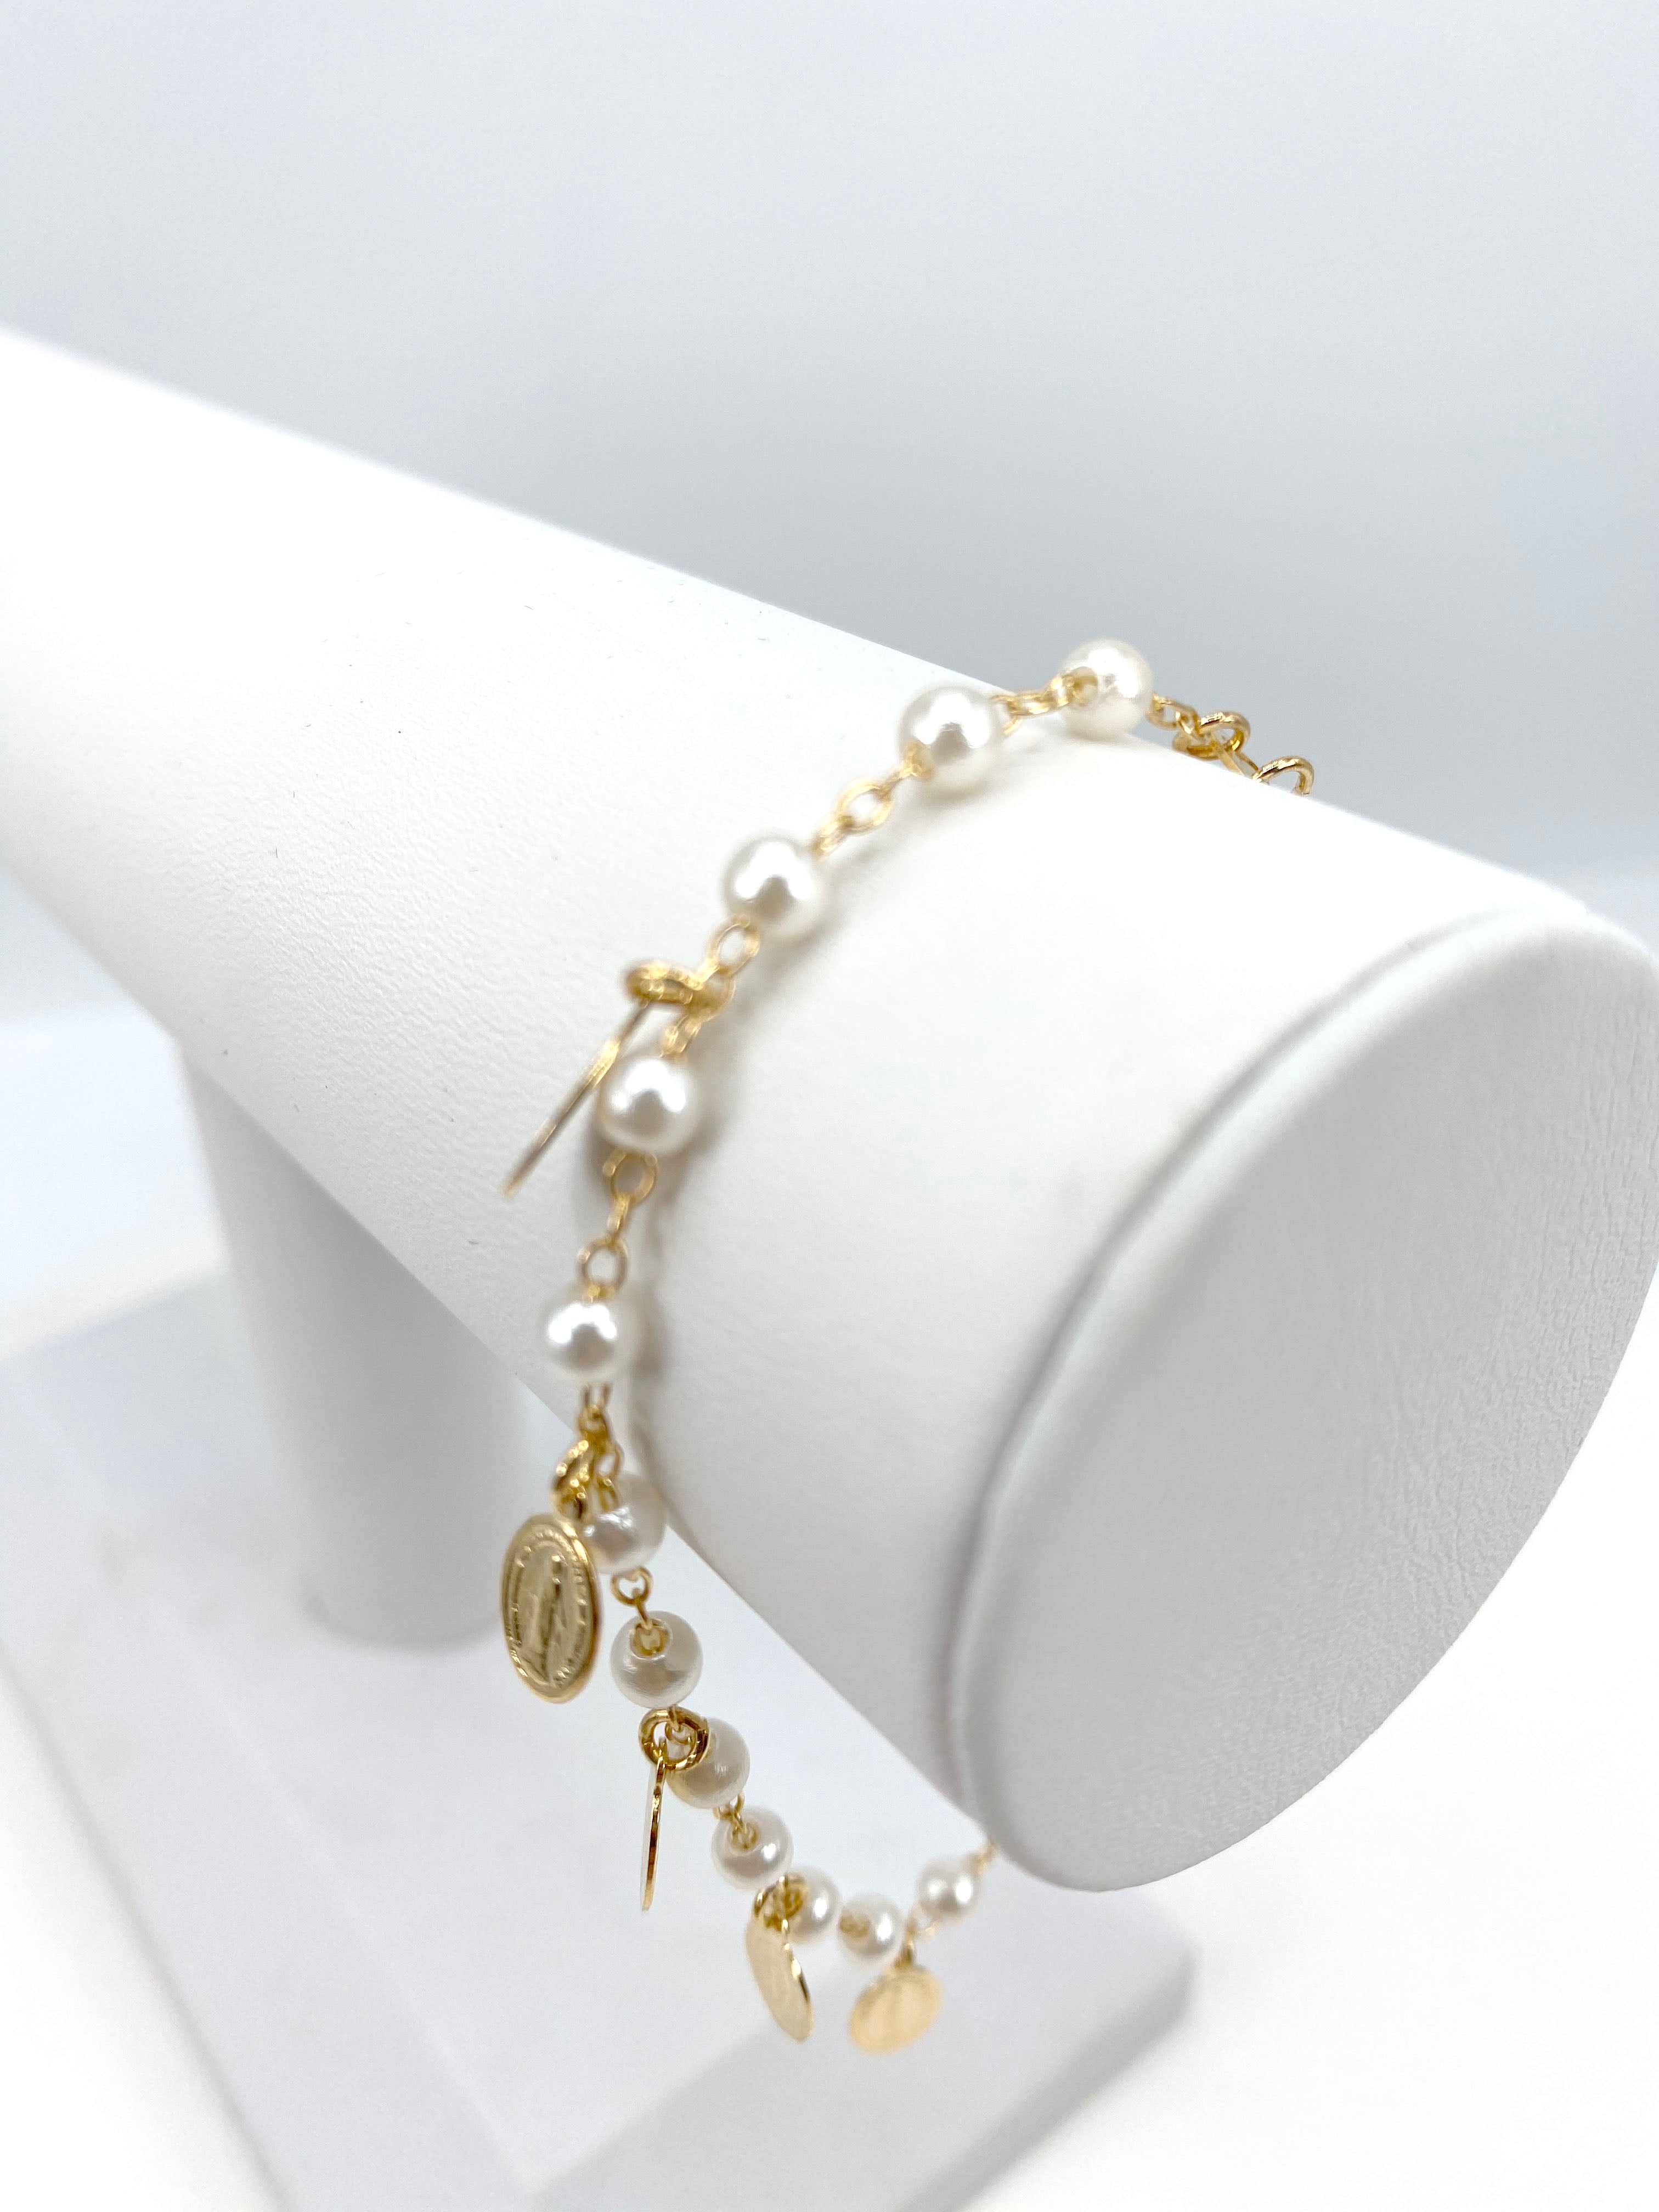 Bracelet with simulated pearls and Our Lady  of Grace charms